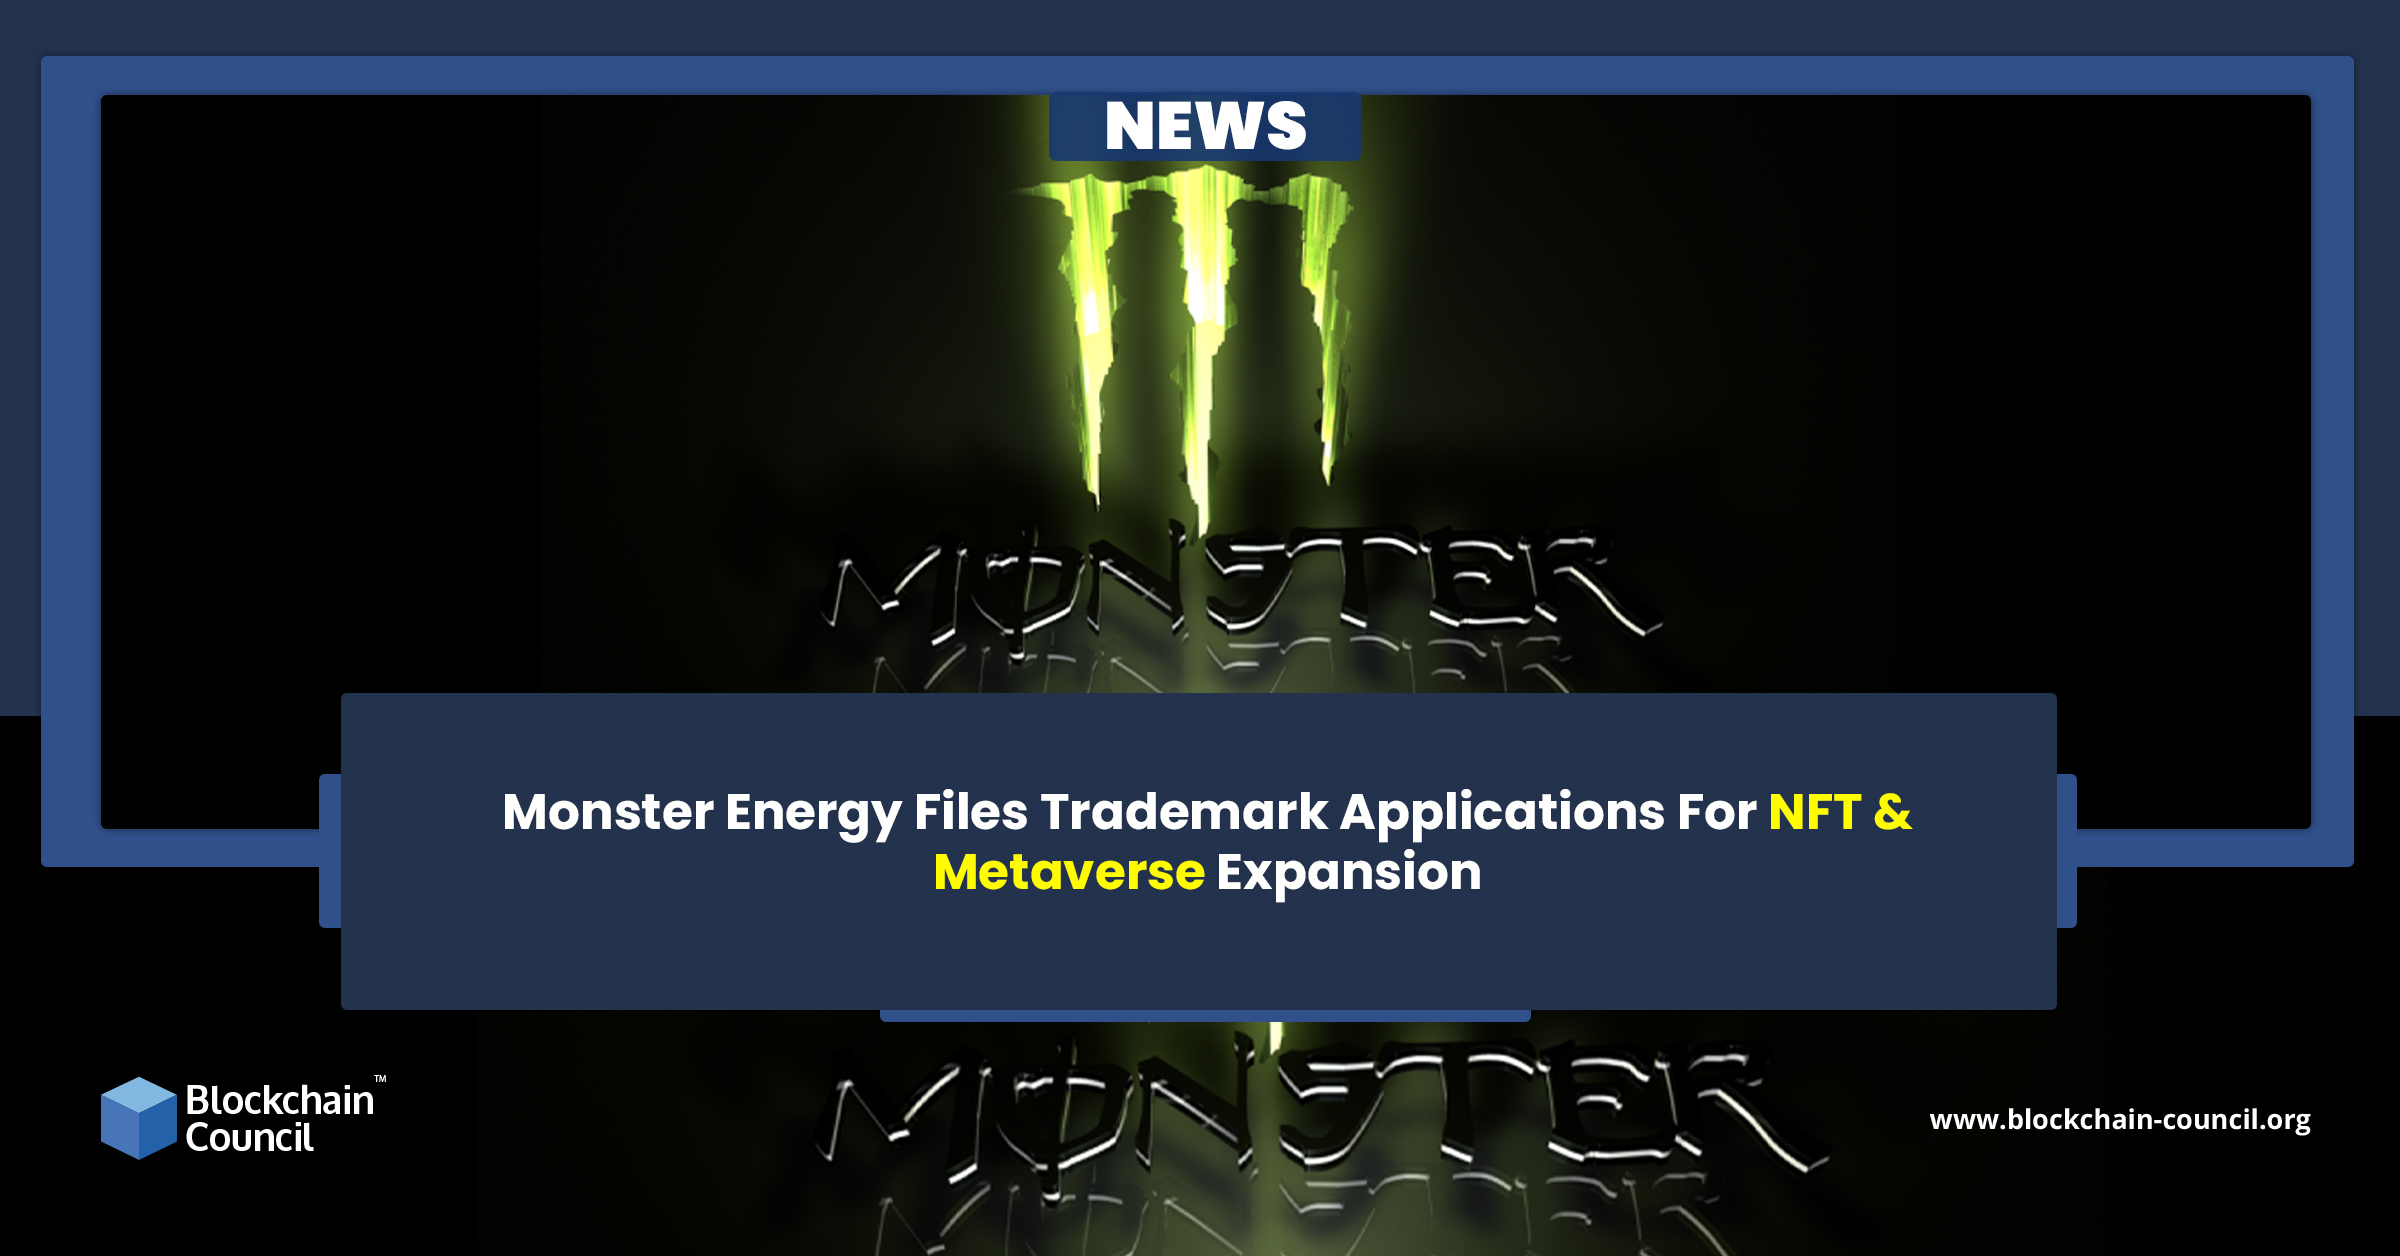 Monster Energy Files Trademark Applications For NFT & Metaverse Expansion